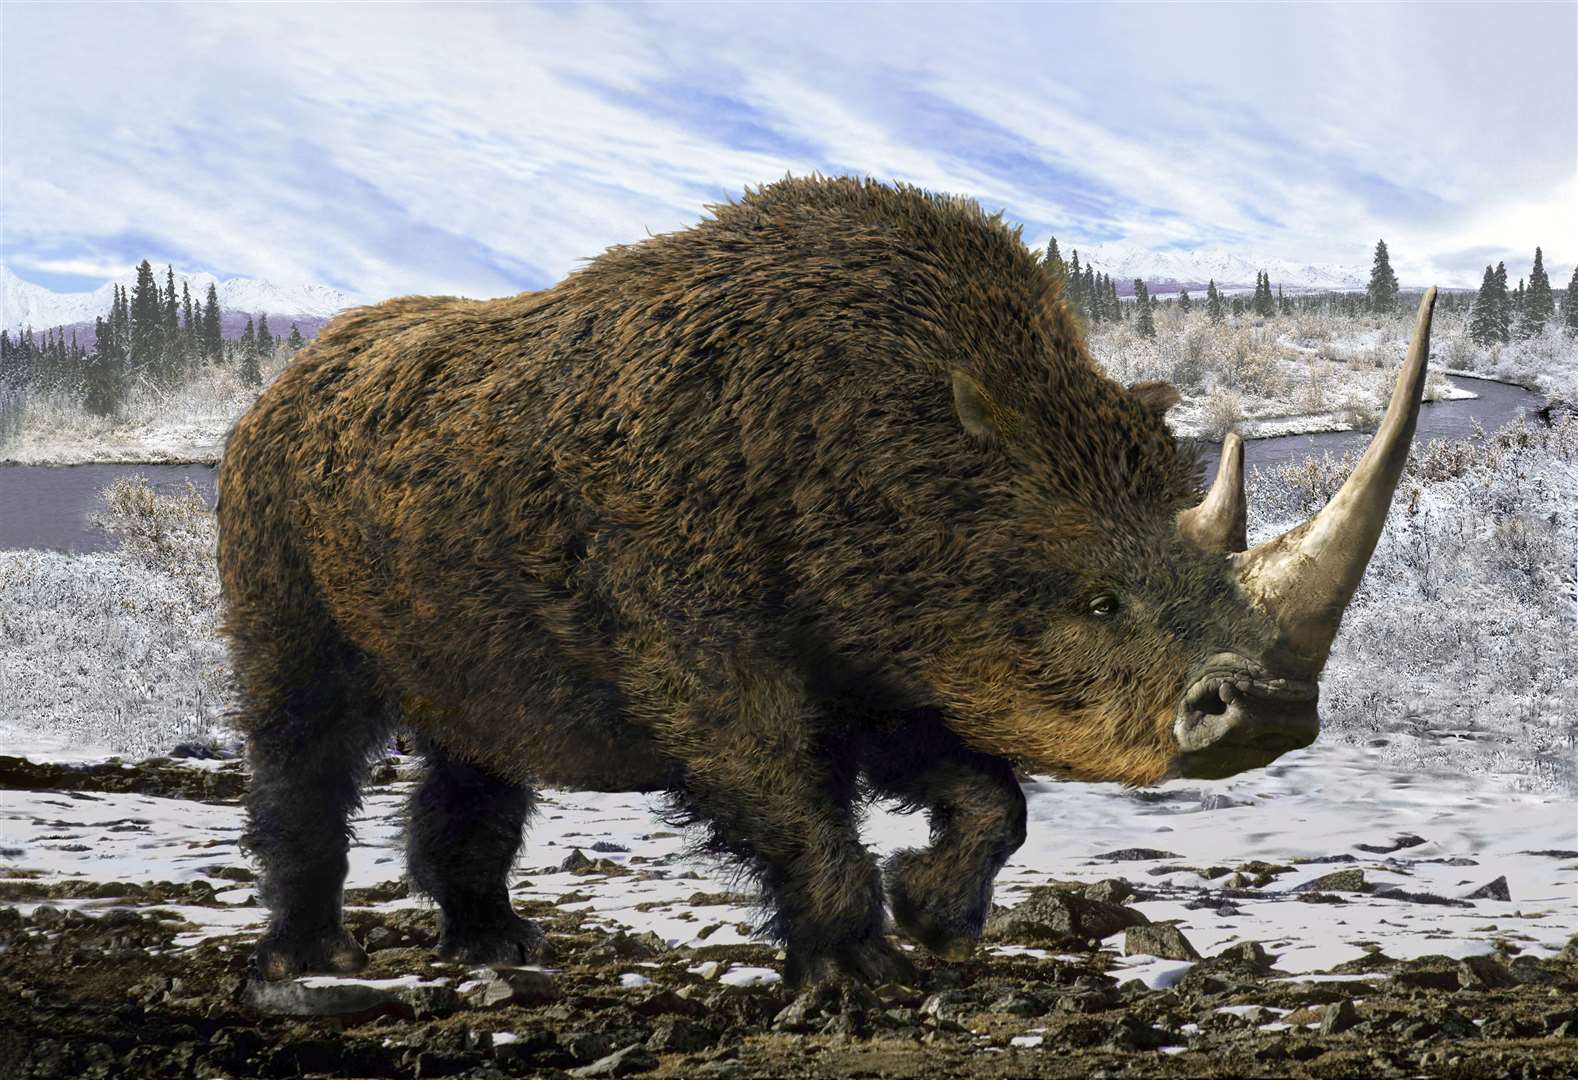 Discover the woolly rhinoceros and other creatures of past Kent wildlife.